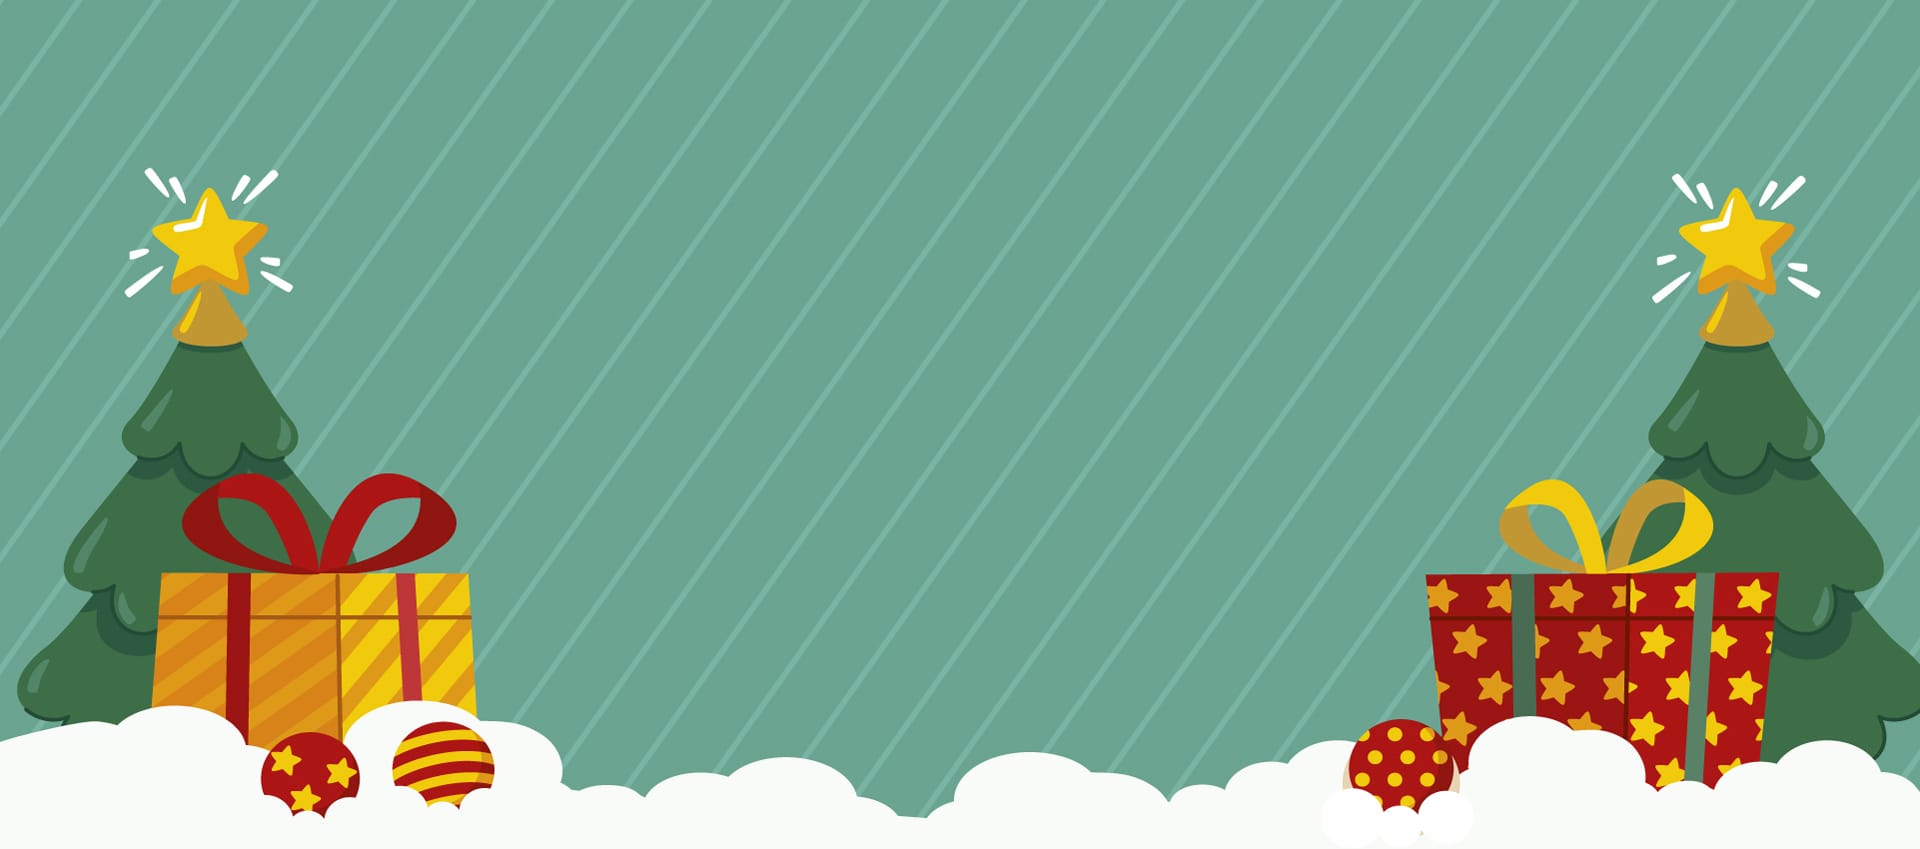 Flat business christmas banner template picture